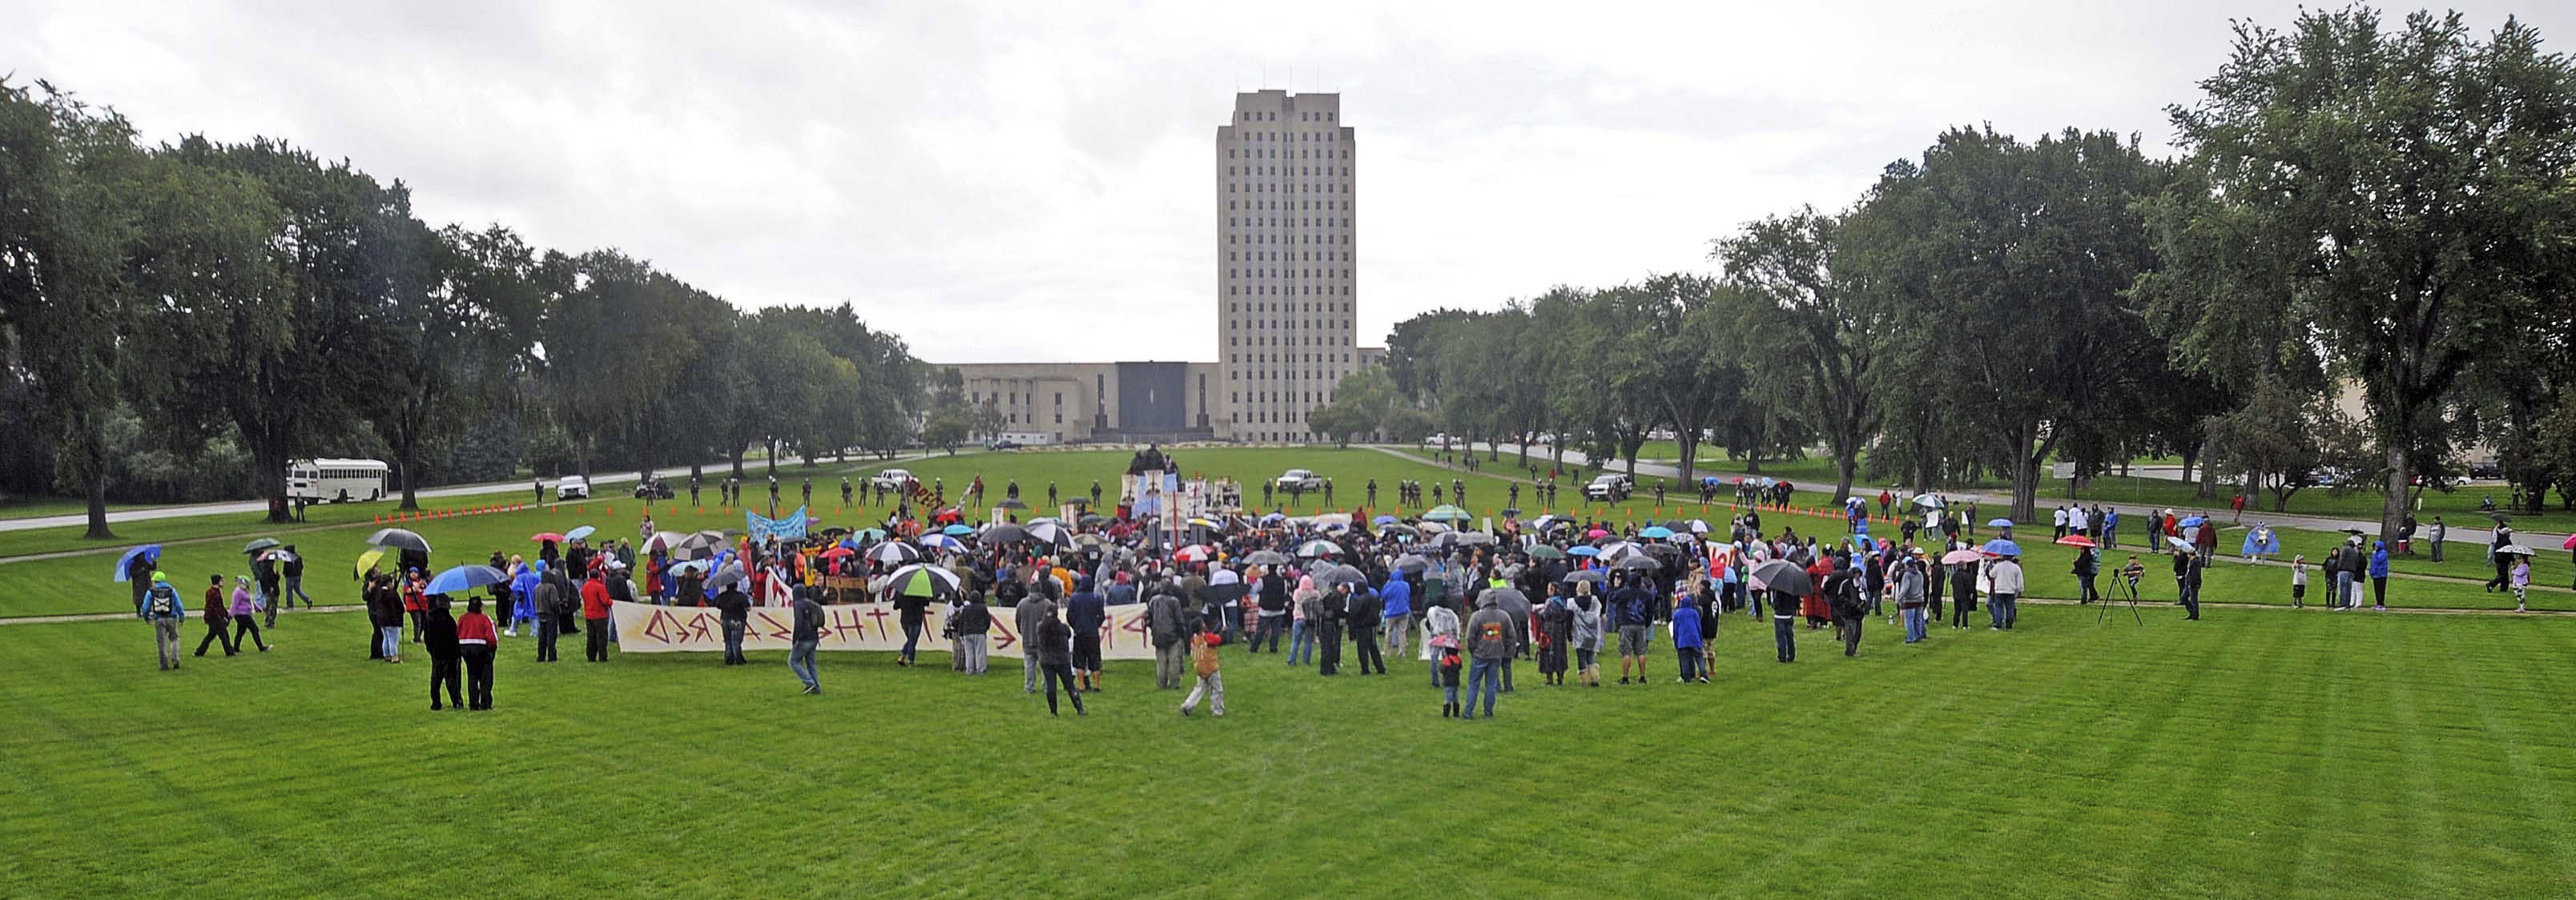 People rally against the Dakota Access Pipeline  on the grounds of the North Dakota state capitol Friday, Sept. 9, 2016 in Bismarck, N.D. The federal government stepped into the fight over the Dakota Access oil pipeline Friday, ordering work to stop on one segment of the project in North Dakota and asking the Texas-based company building it to "voluntarily pause" action on a wider span that an American Indian tribe says holds sacred artifacts.